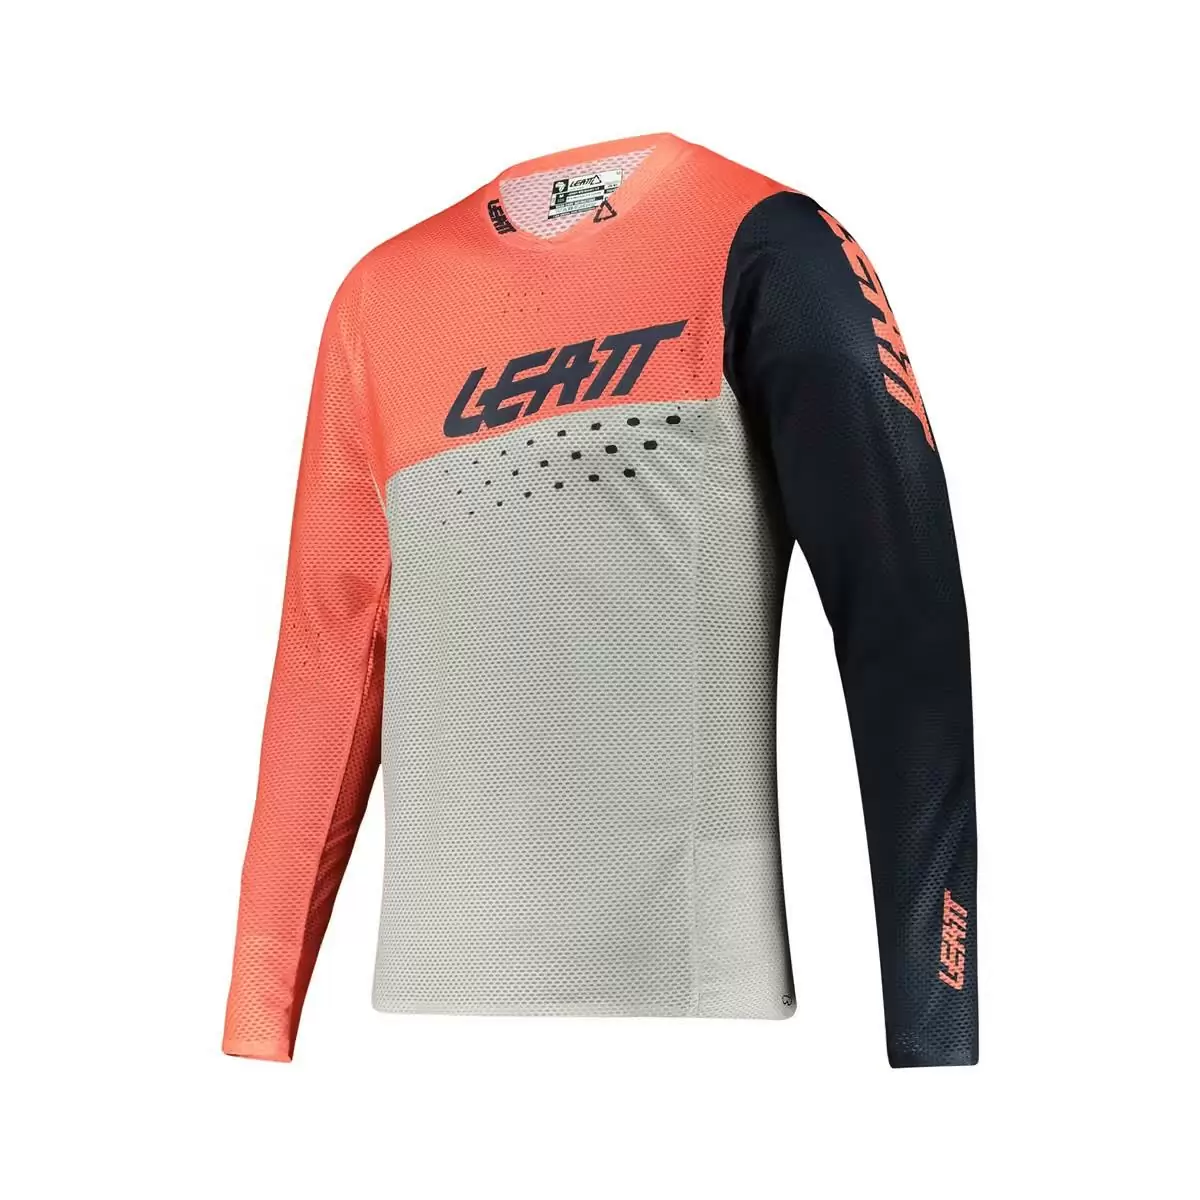 Long Sleeve Jersey Mtb Gravity 4.0 Coral size M - image